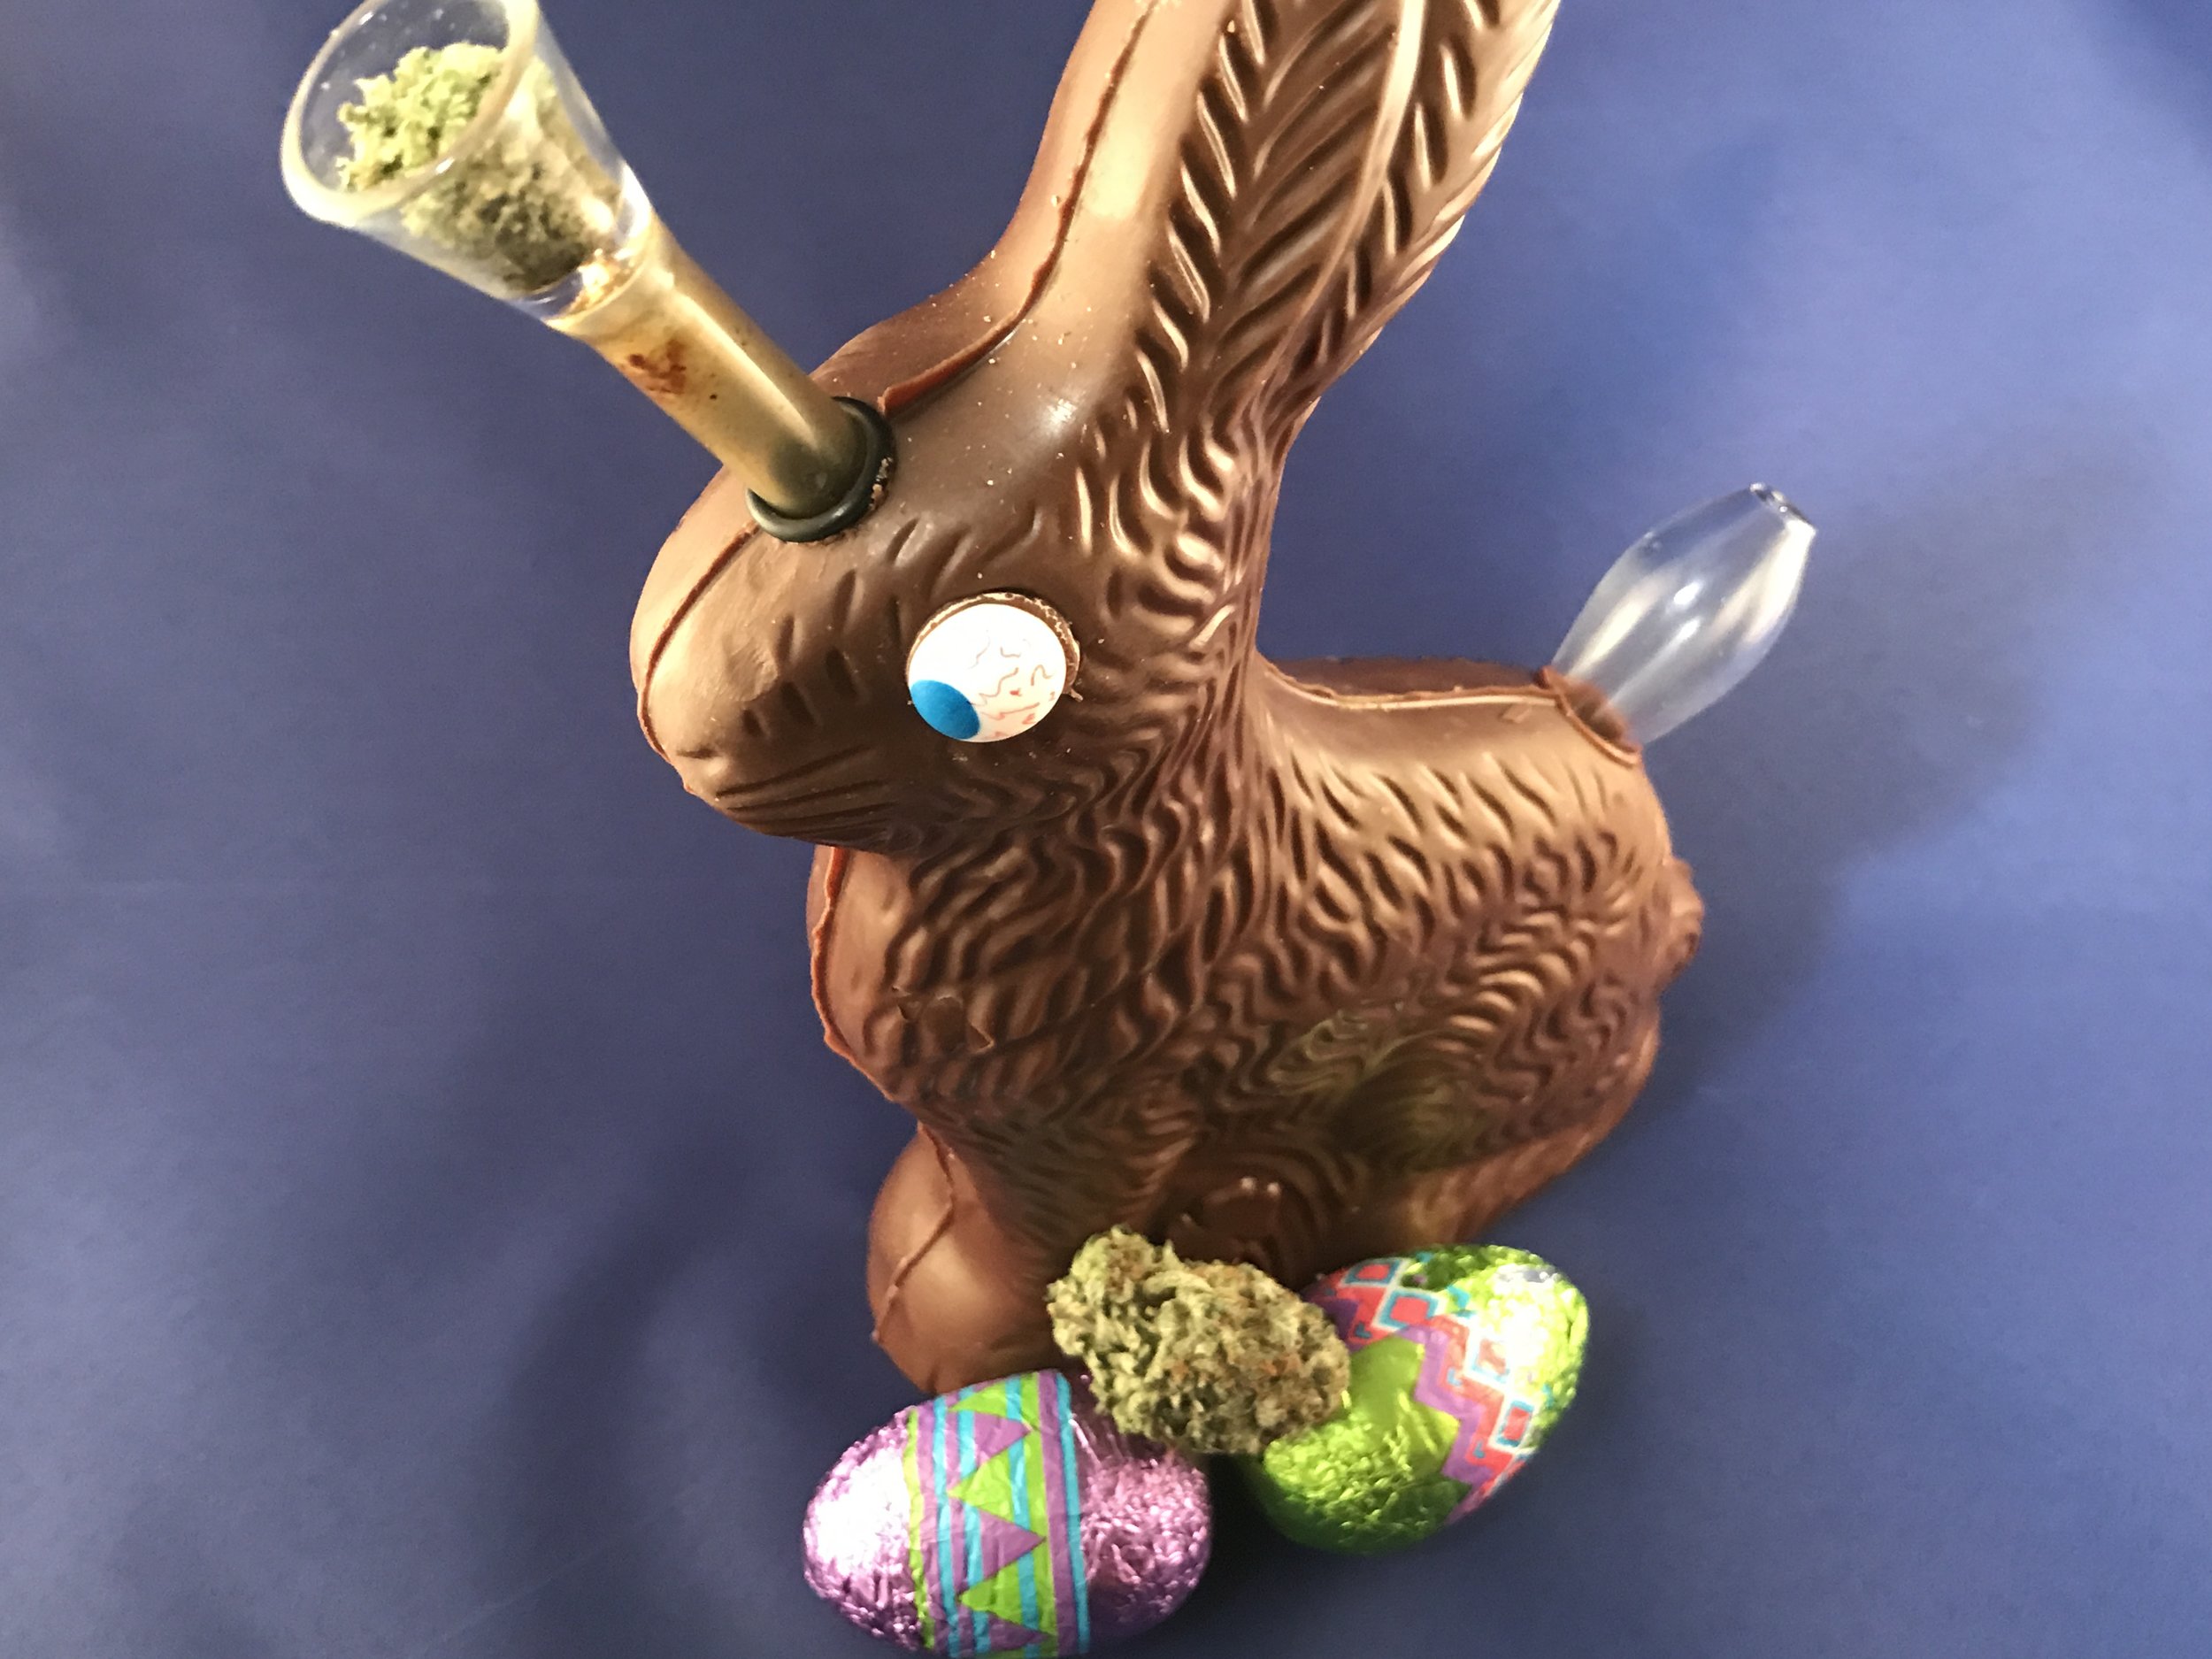 Stoner Crafts: DIY Chocolate Easter Bunny Bong by Chronic Crafter.